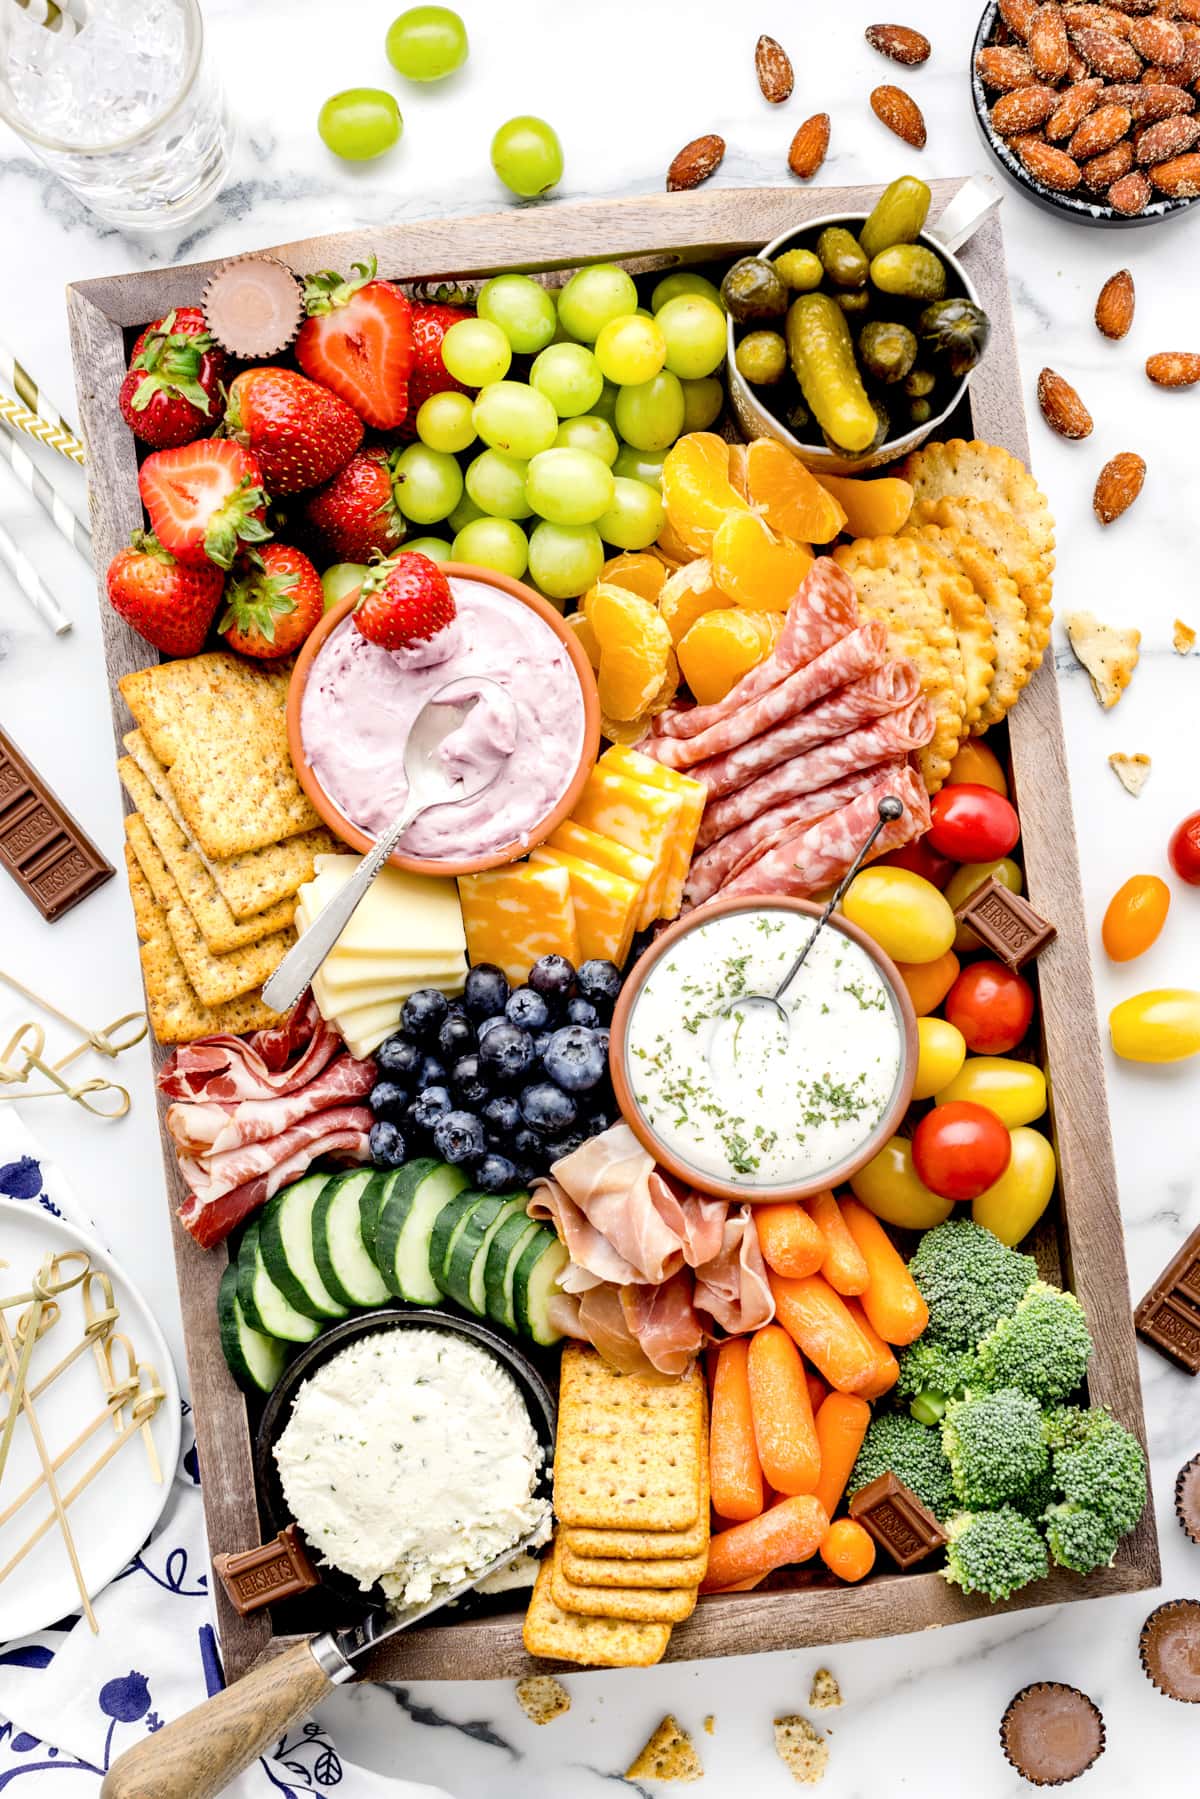 How to make a charcuterie board and fill it with your favorite things to snack on.